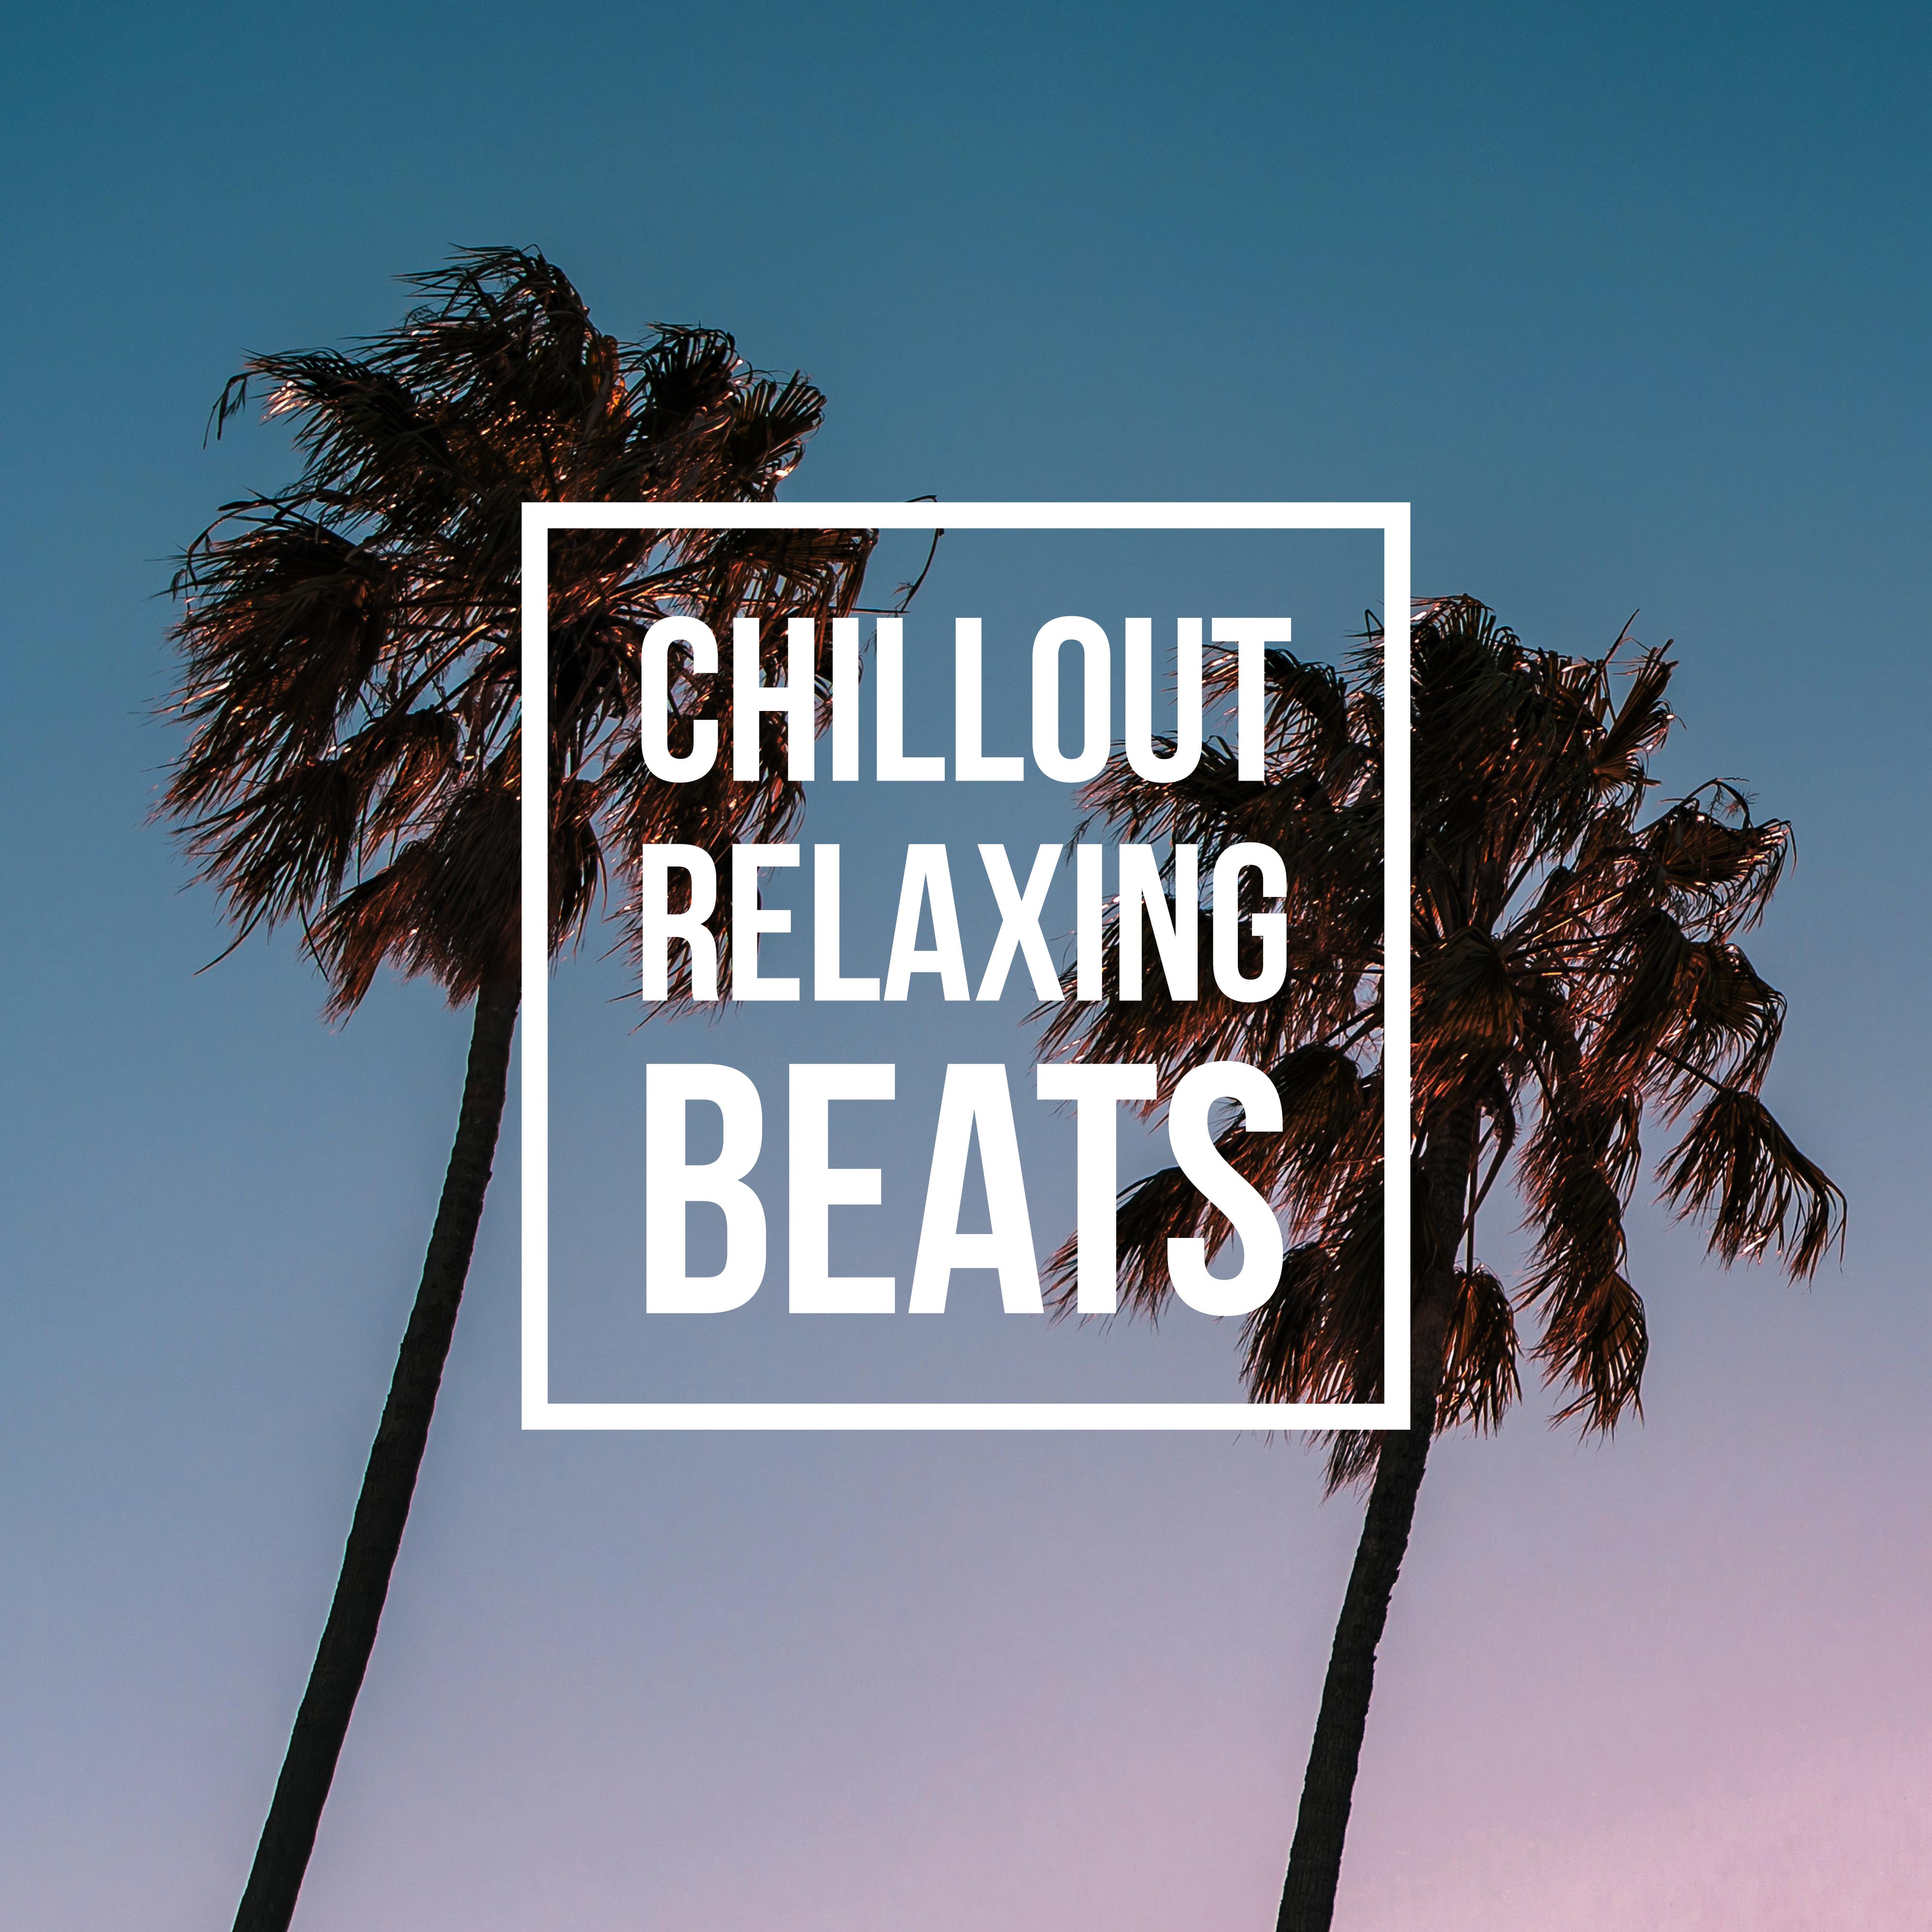 Chillout Relaxing Beats